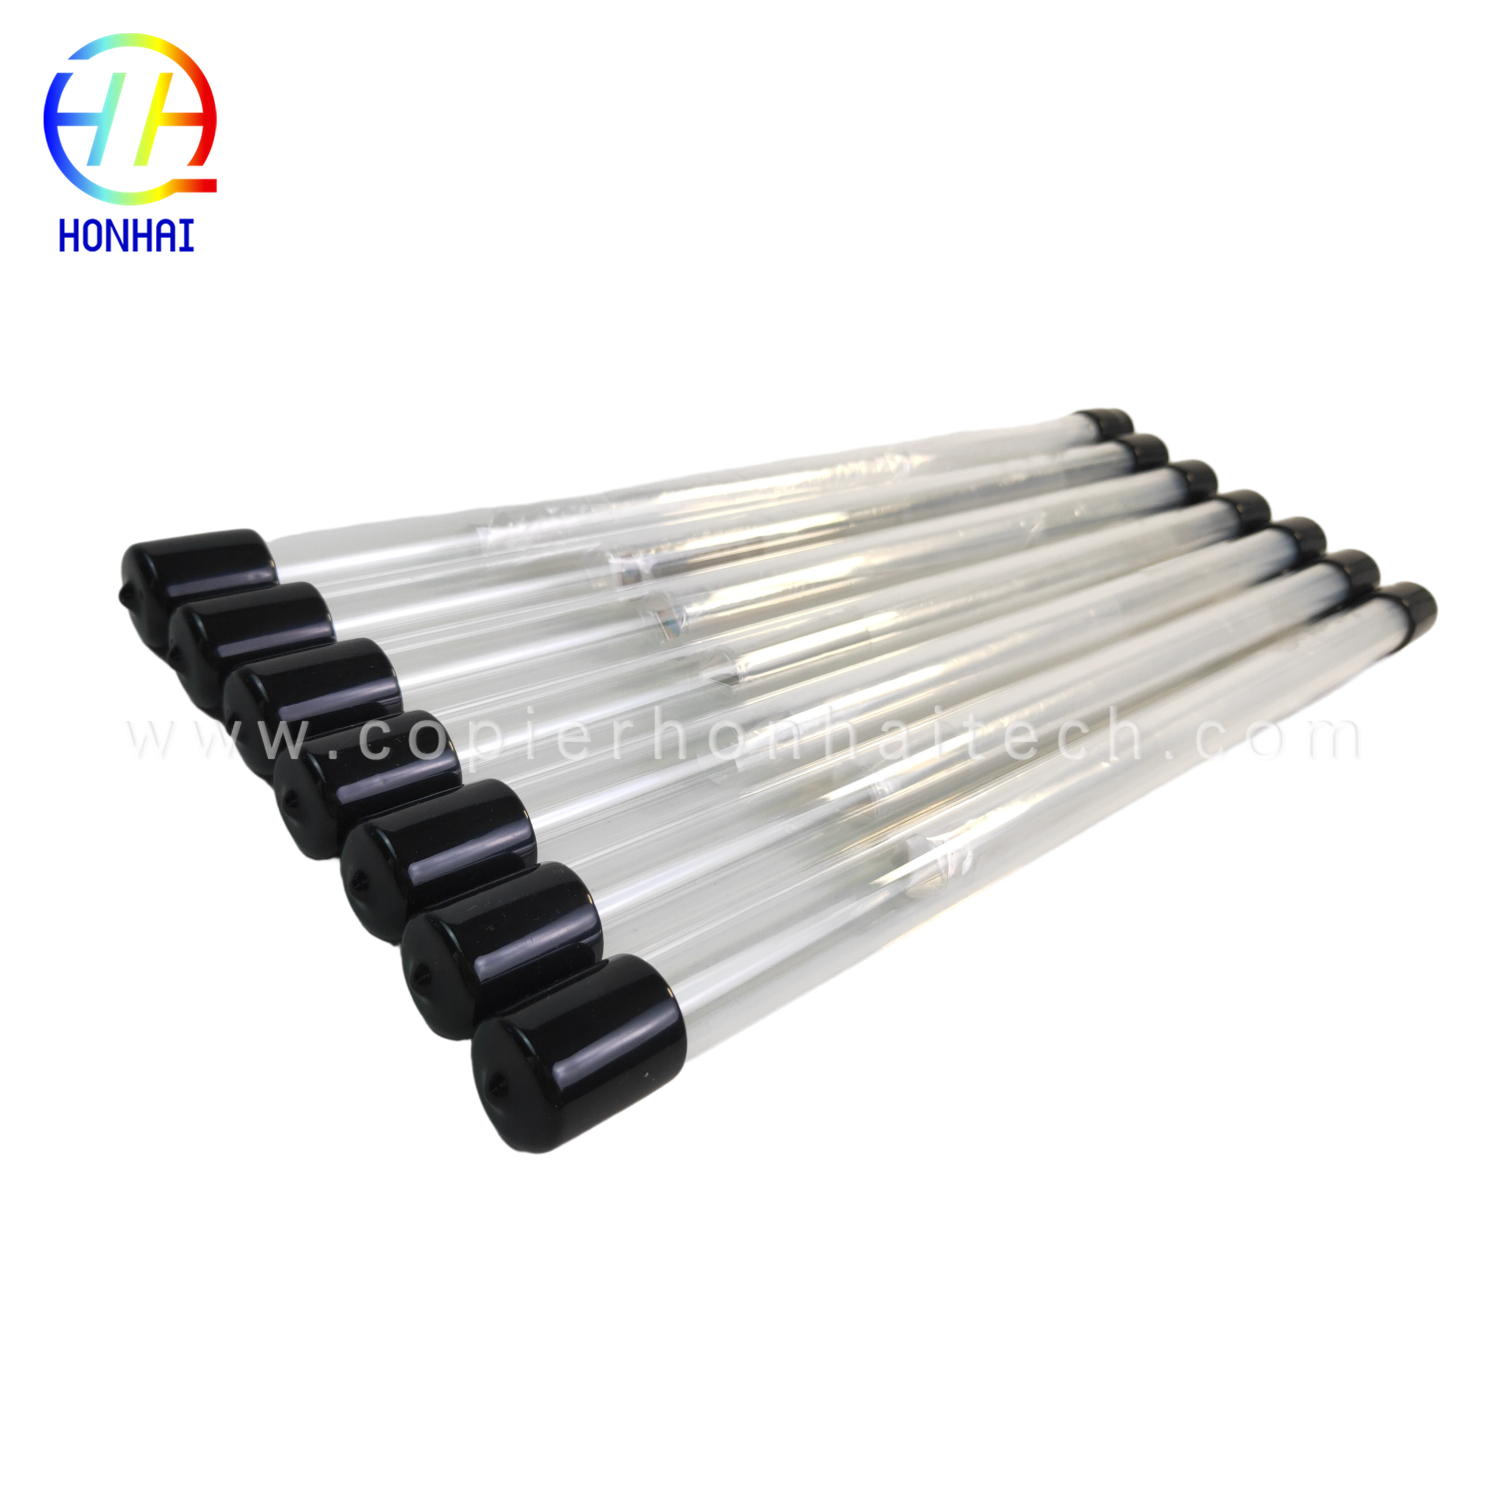 https://www.copierhonhaitech.com/import-from-japan-heating-element-220v-for-canon-ir-a525-product/